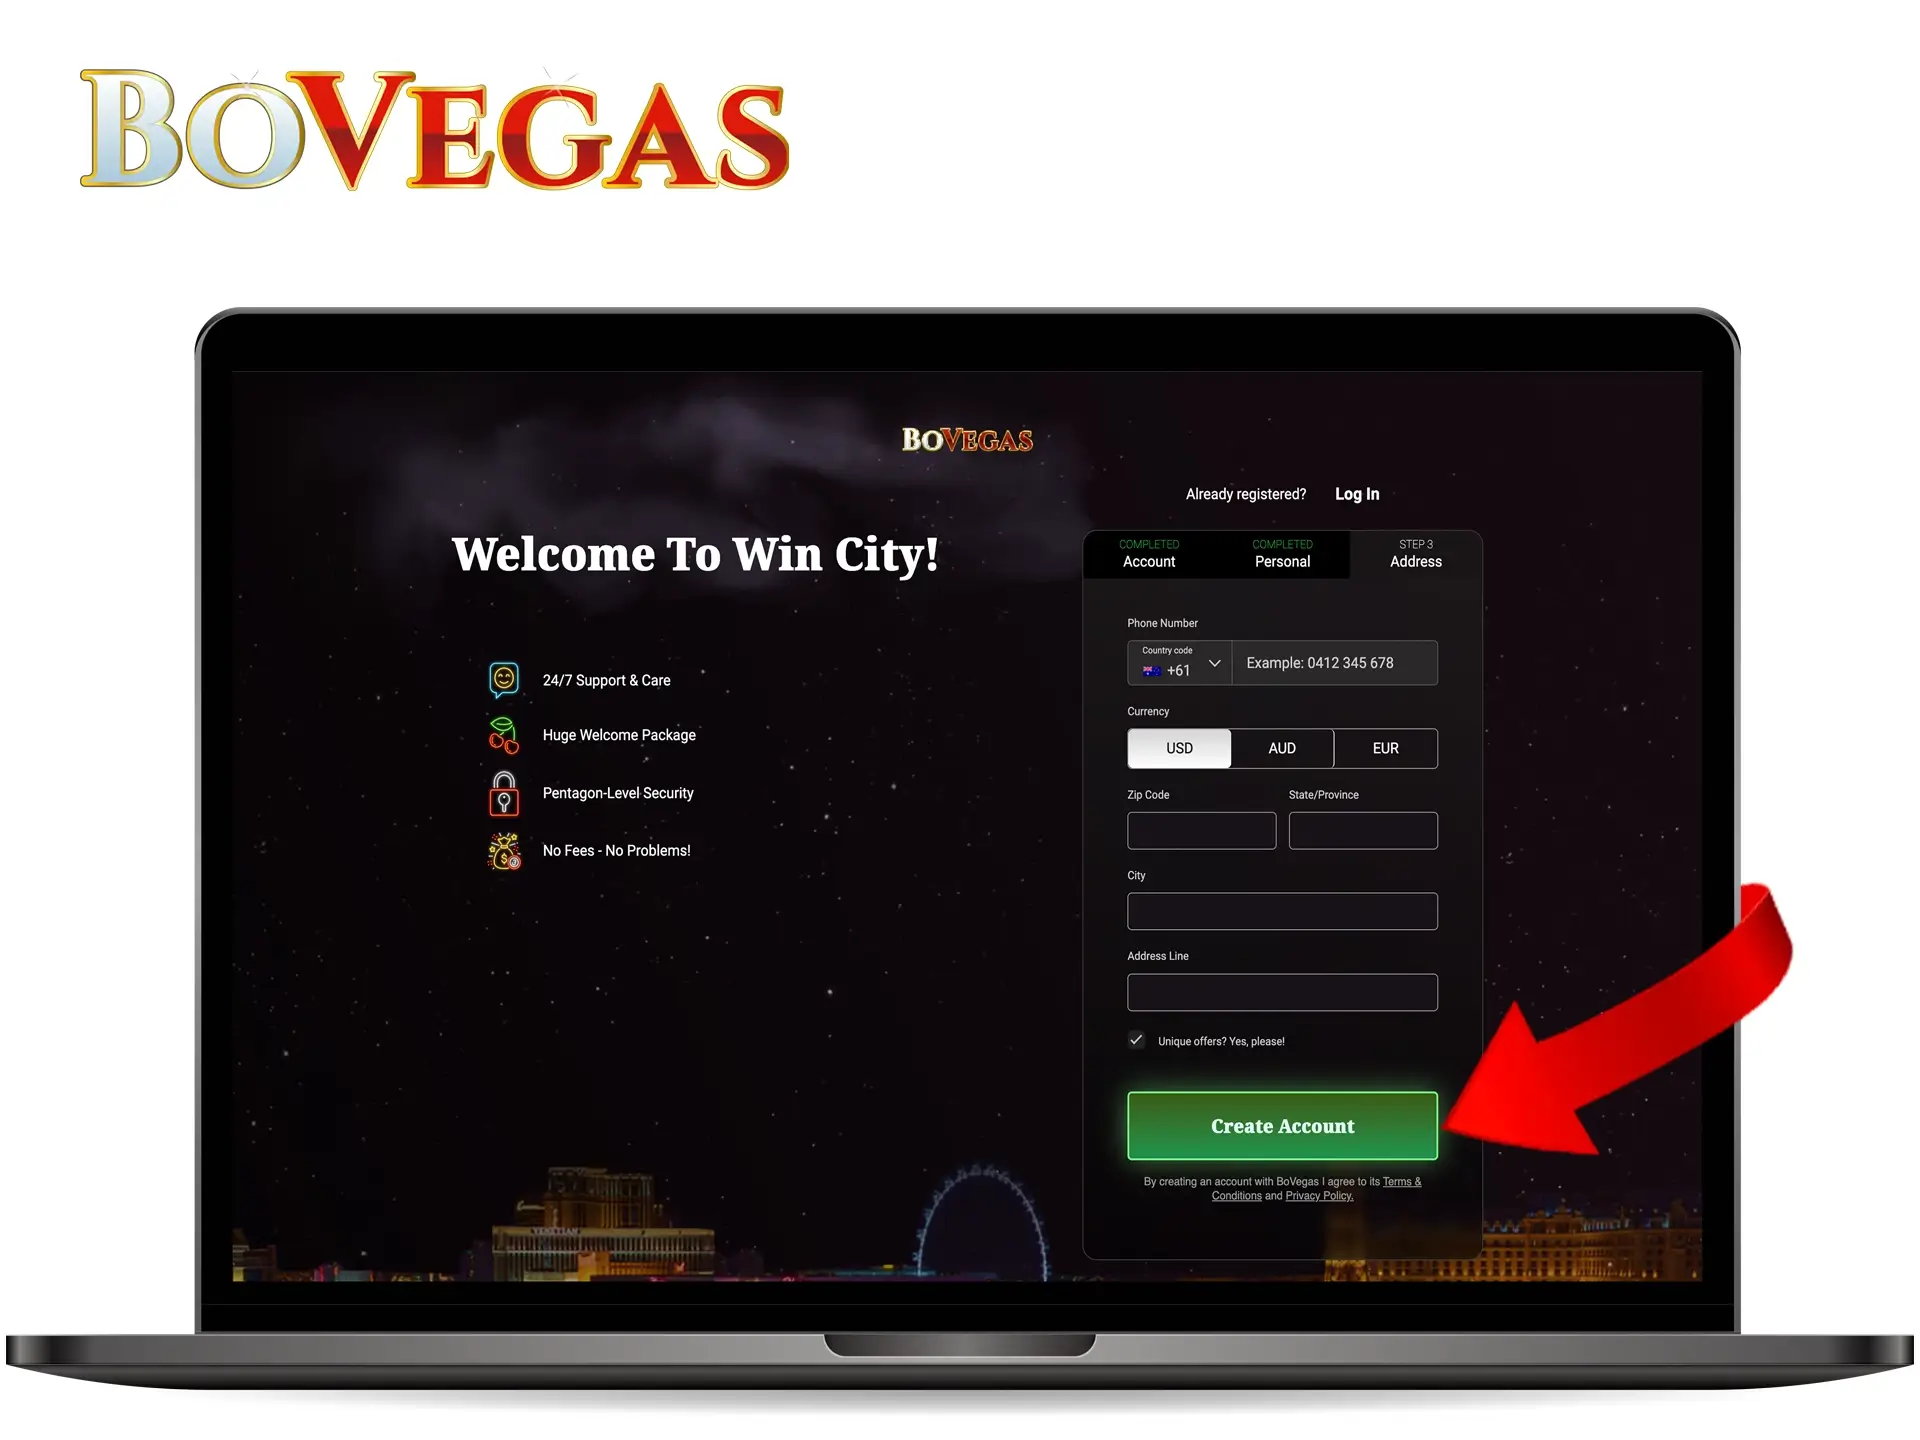 Confirm your registration with BoVegas Casino.